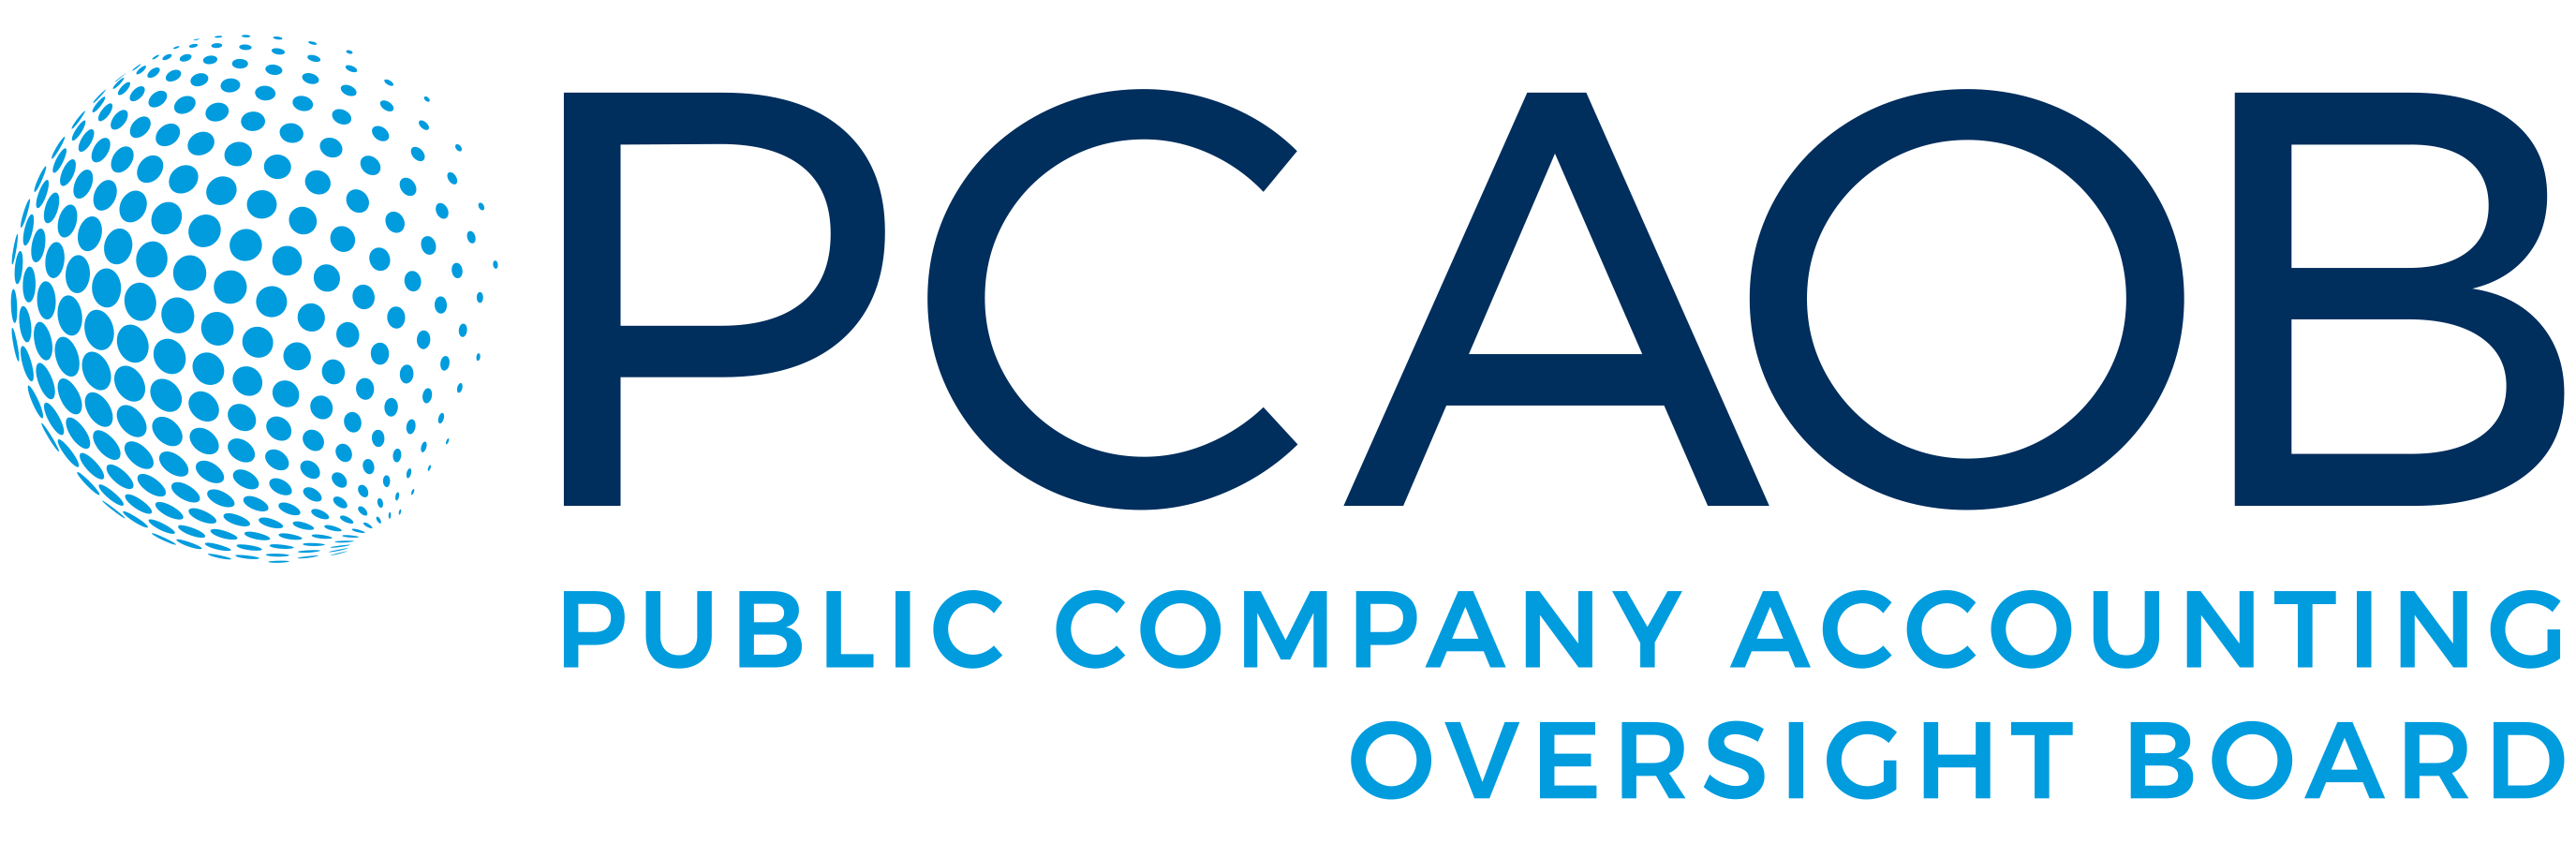 The Public Company Accounting Oversight Board